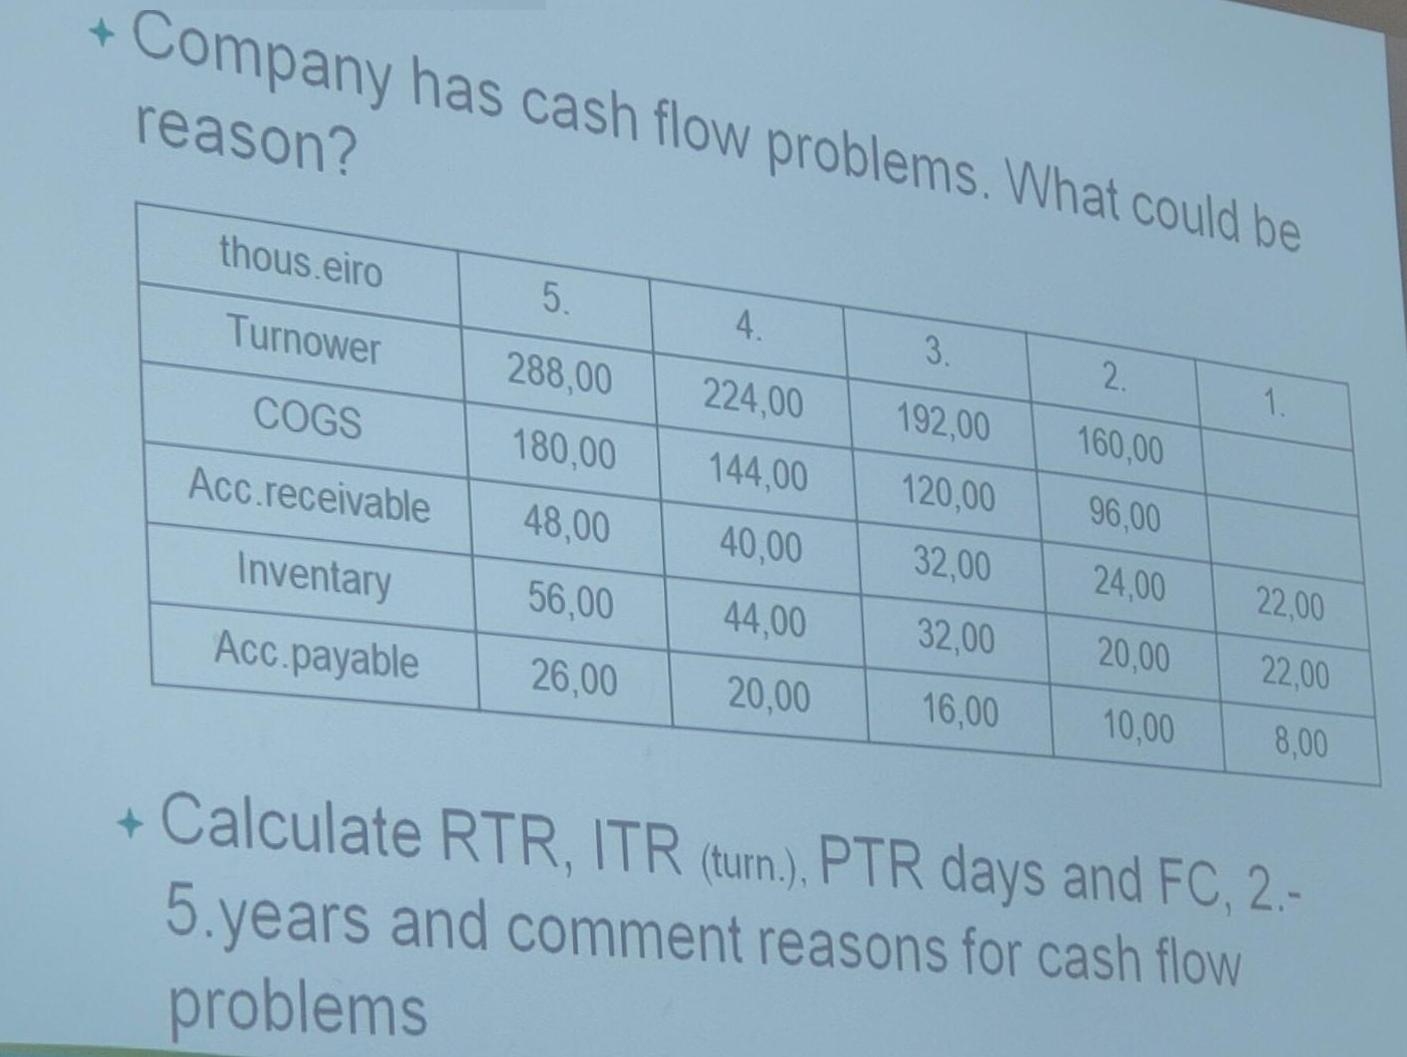 + Company has cash flow problems. What could be reason? thous.eiro Turnower COGS Acc.receivable Inventary